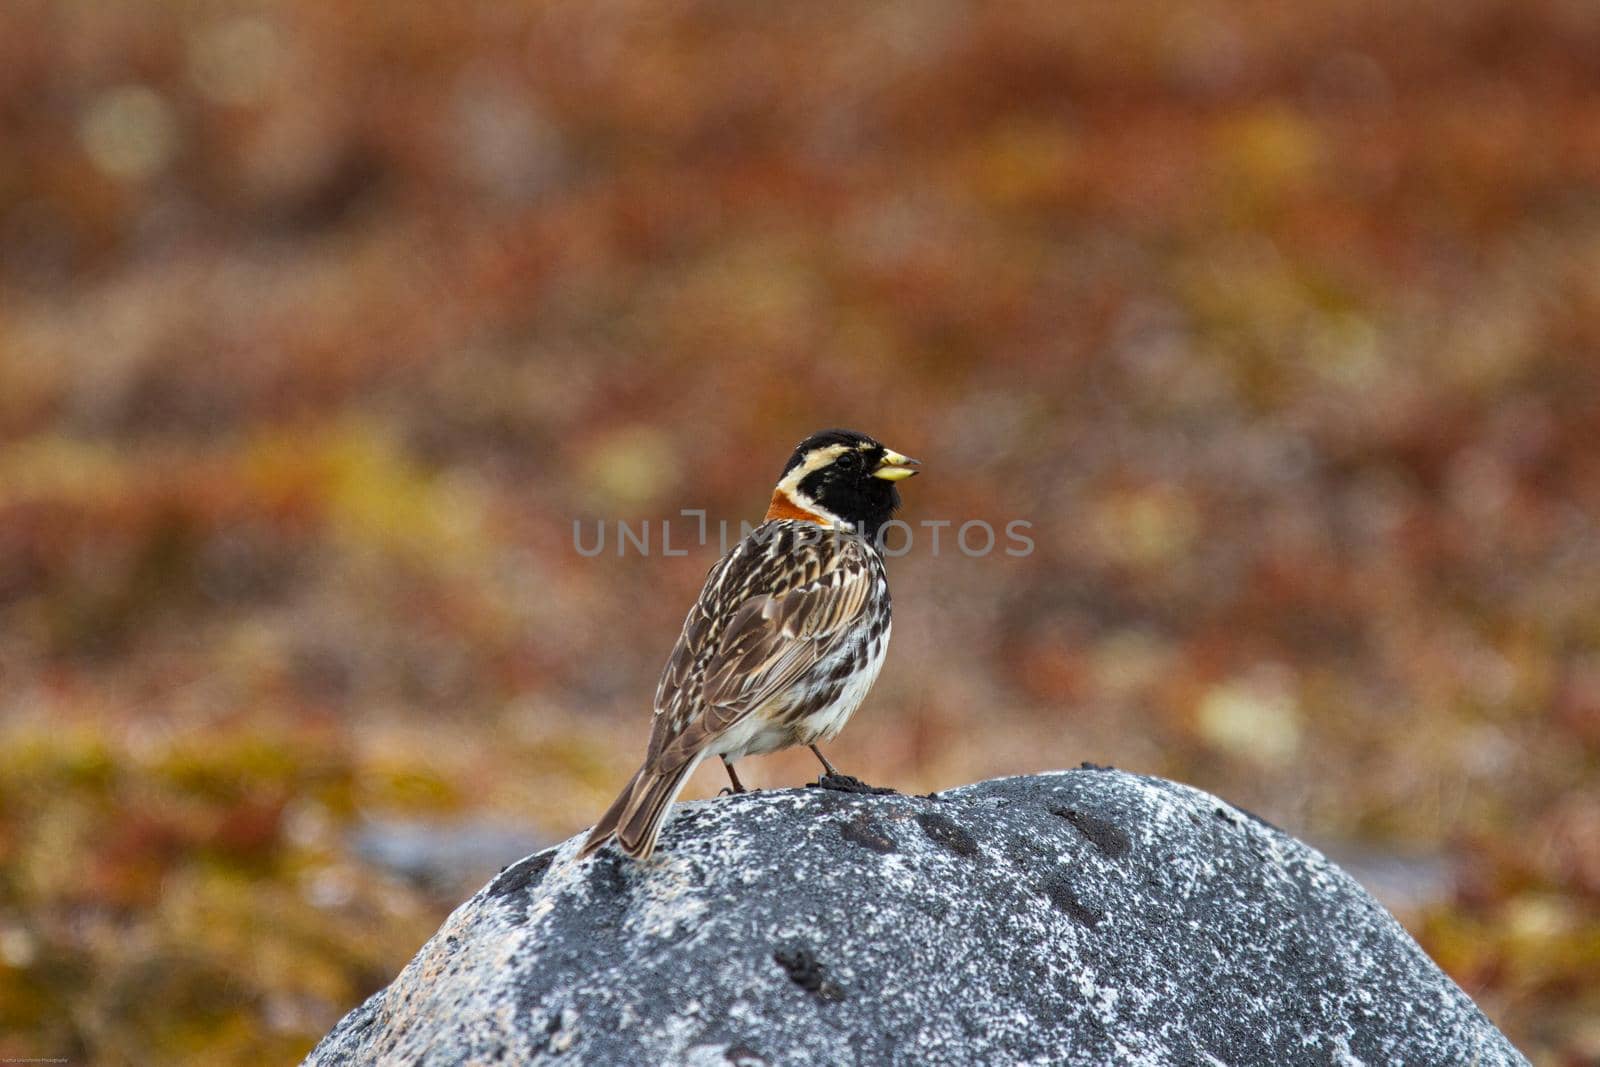 Lapland longspur bird standing on a rock by Granchinho